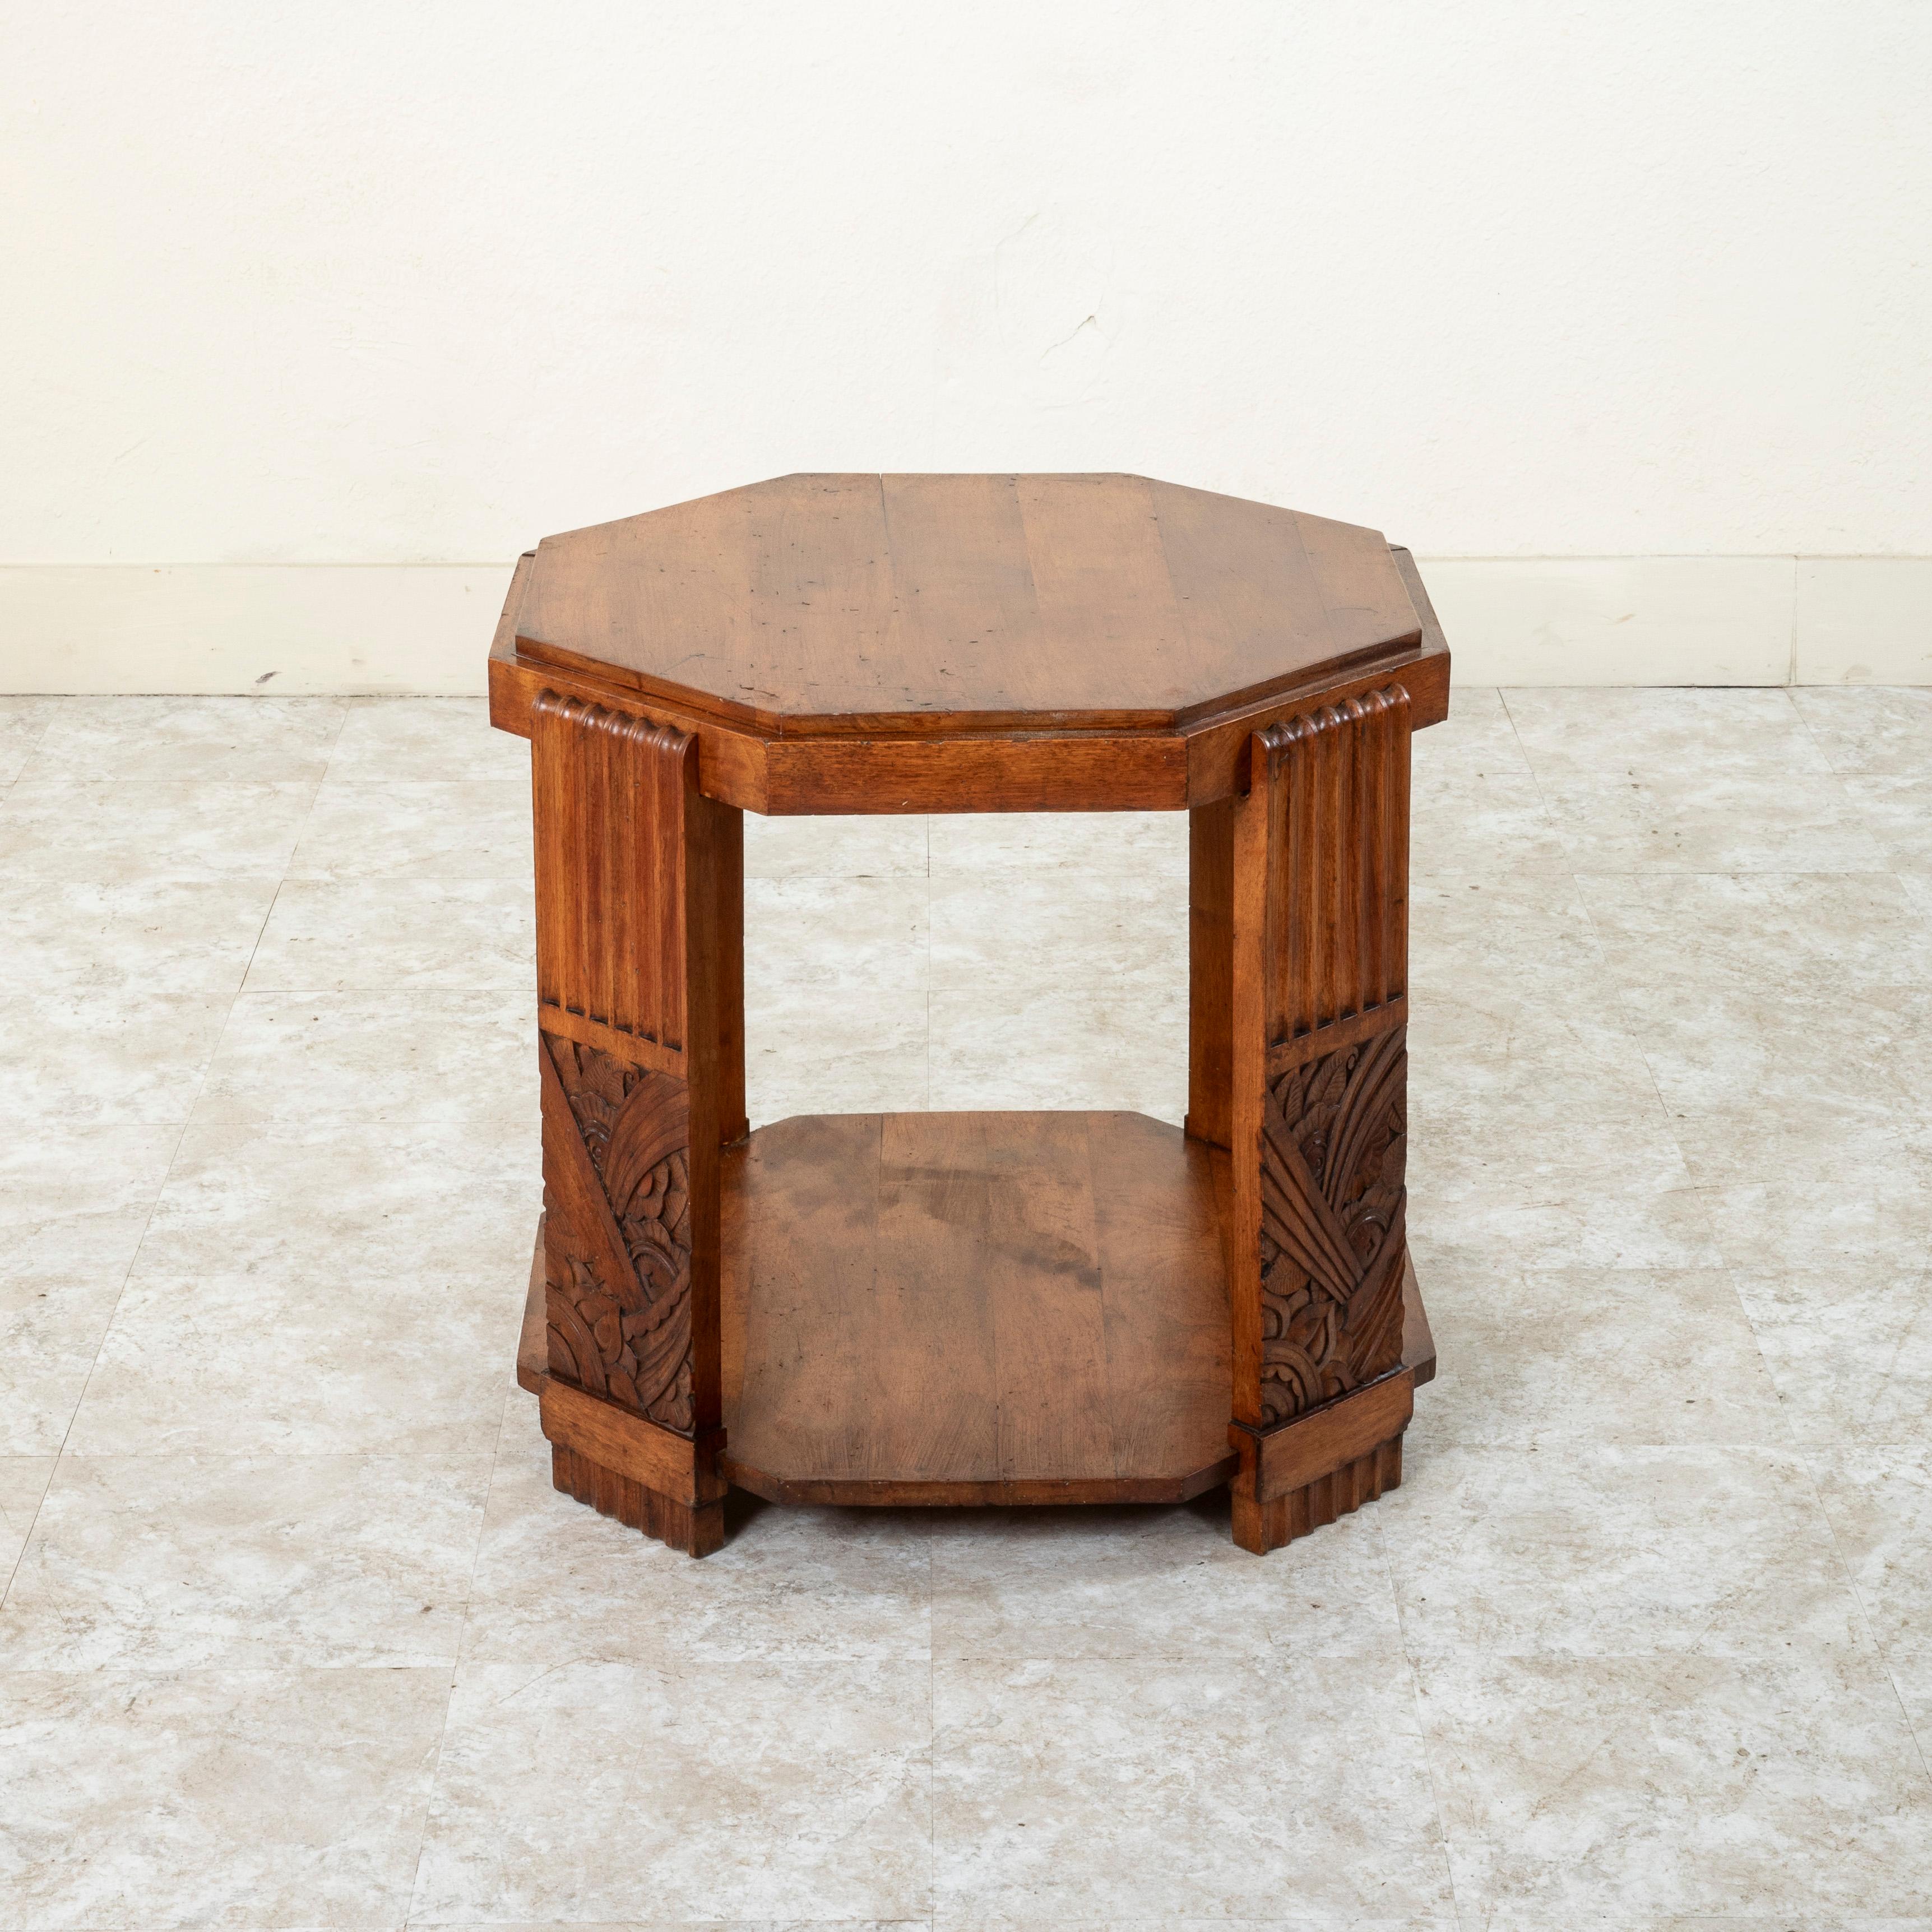 This early twentieth Century French Art Deco period walnut cocktail table or side table features an octagonal top. The top rests on four legs detailed with fluting on the upper half and carved stylized flowers and leaves on the lower half. A lower